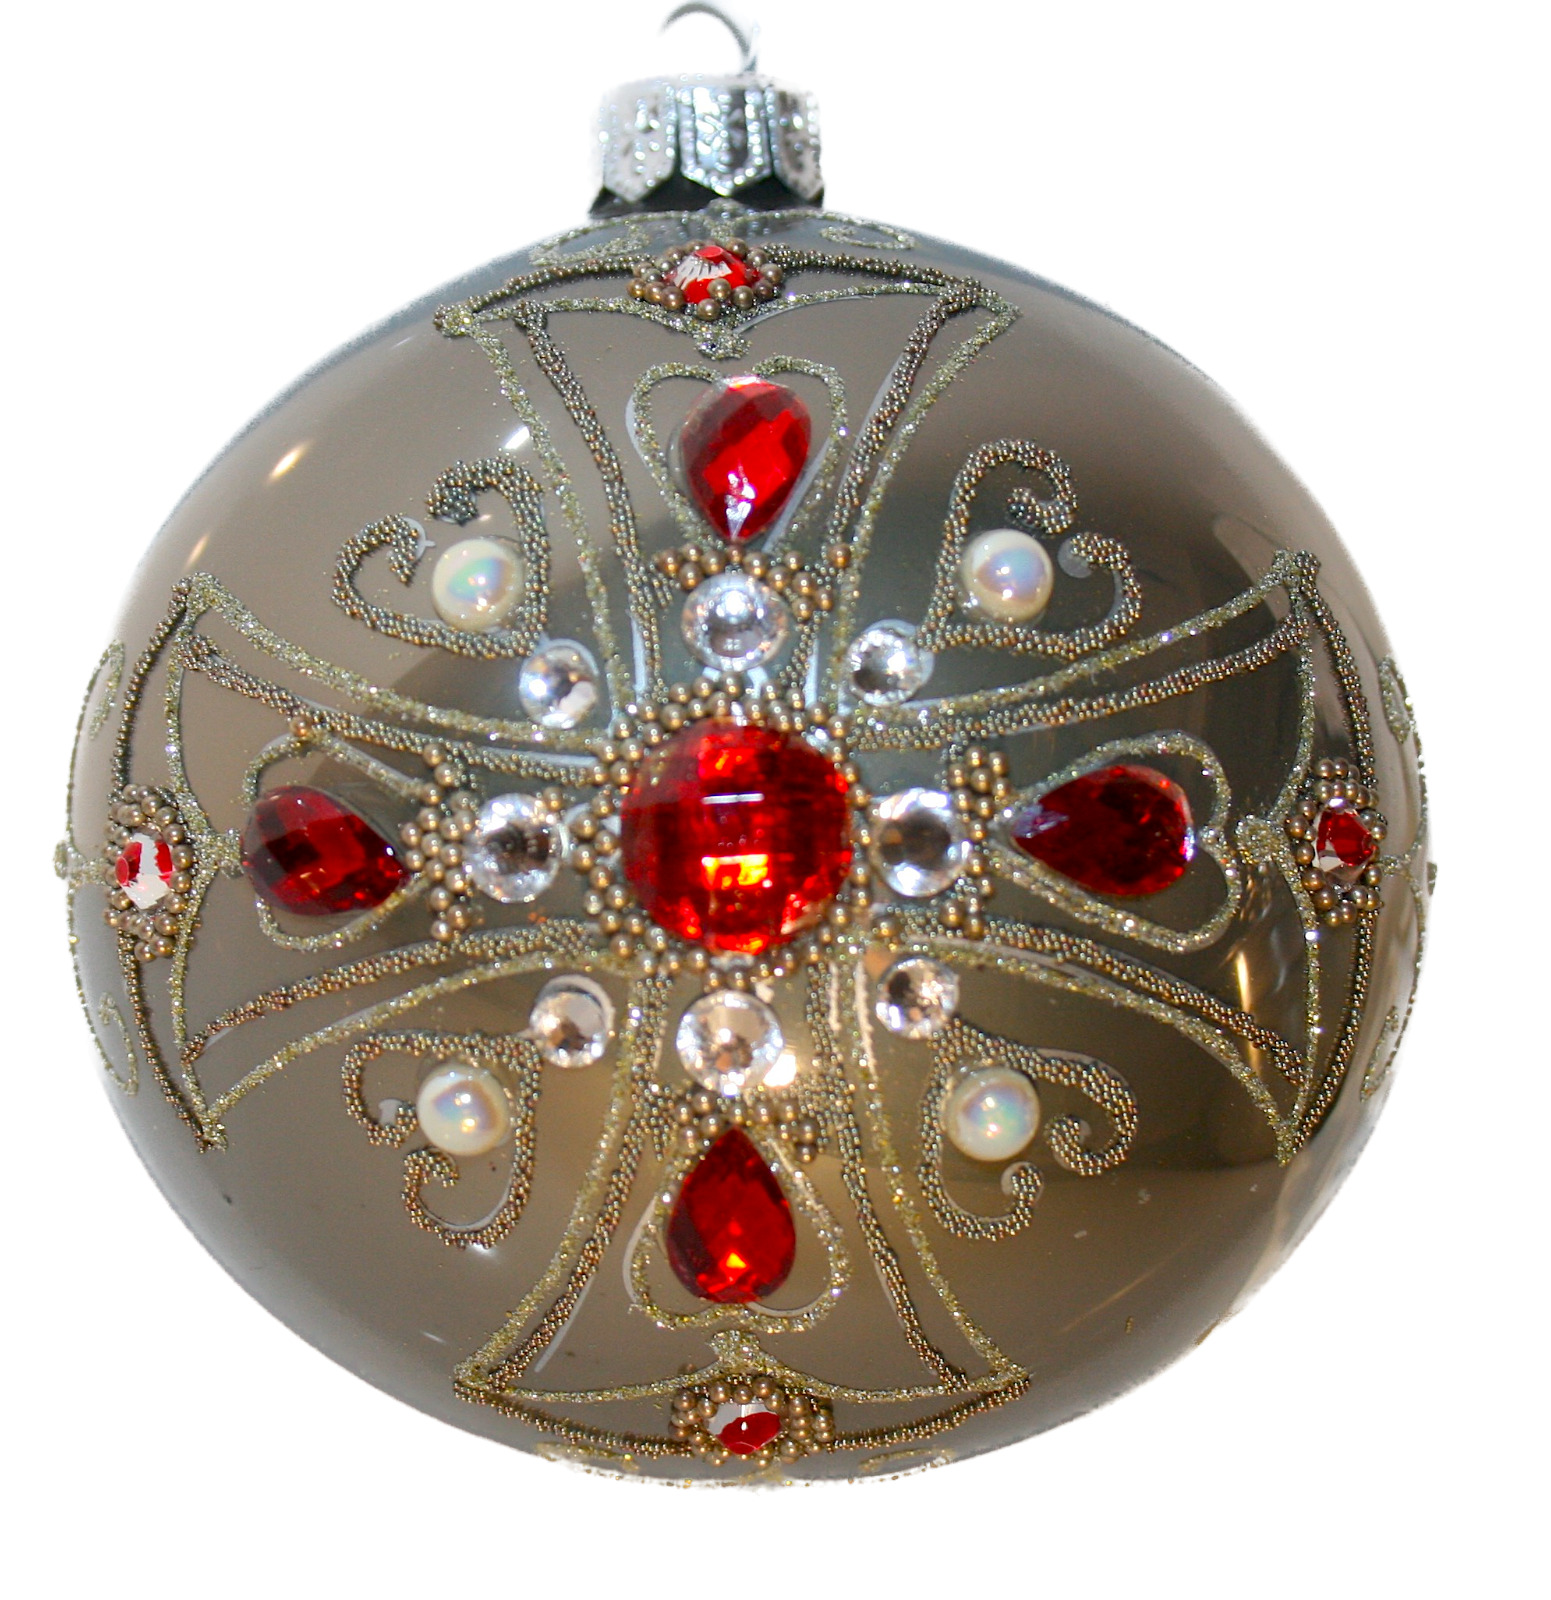 NEIMAN MARCUS Glass Christmas Ornament/Ball Bauble MADE IN POLAND Celtic Cross